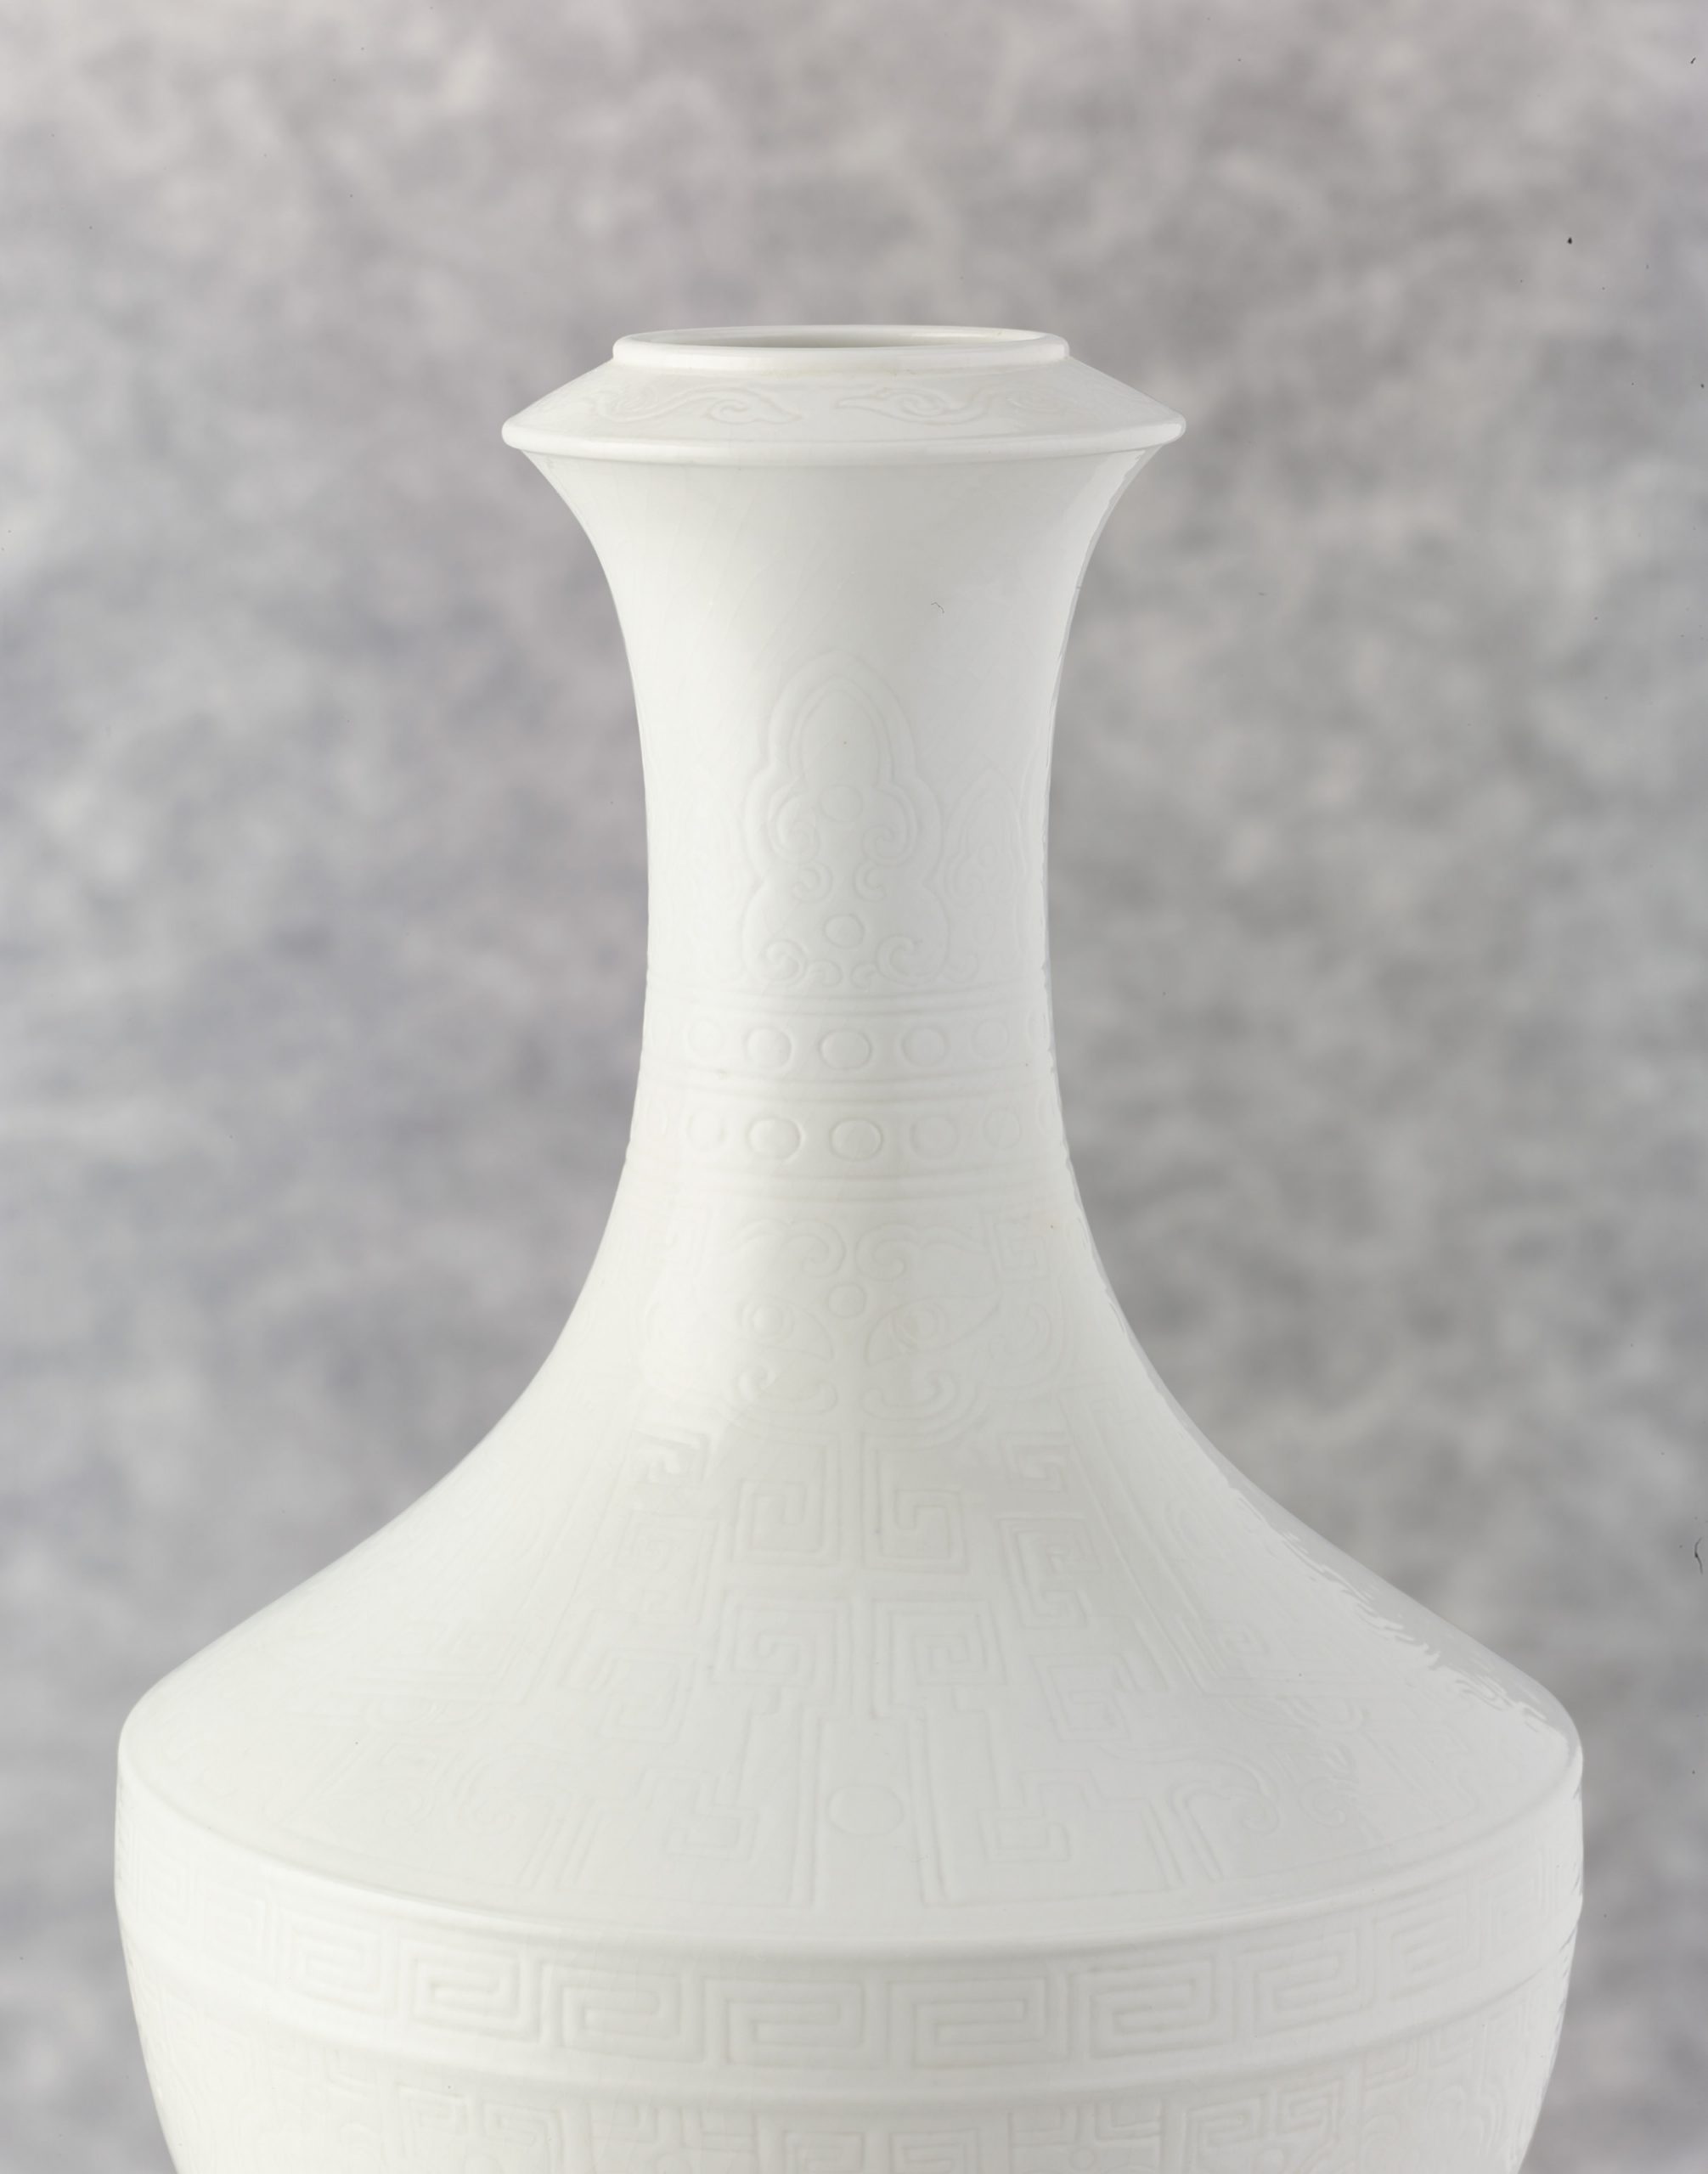 A FINE AND RARE DING-TYPE GLAZED SOFT-PASTE VASE